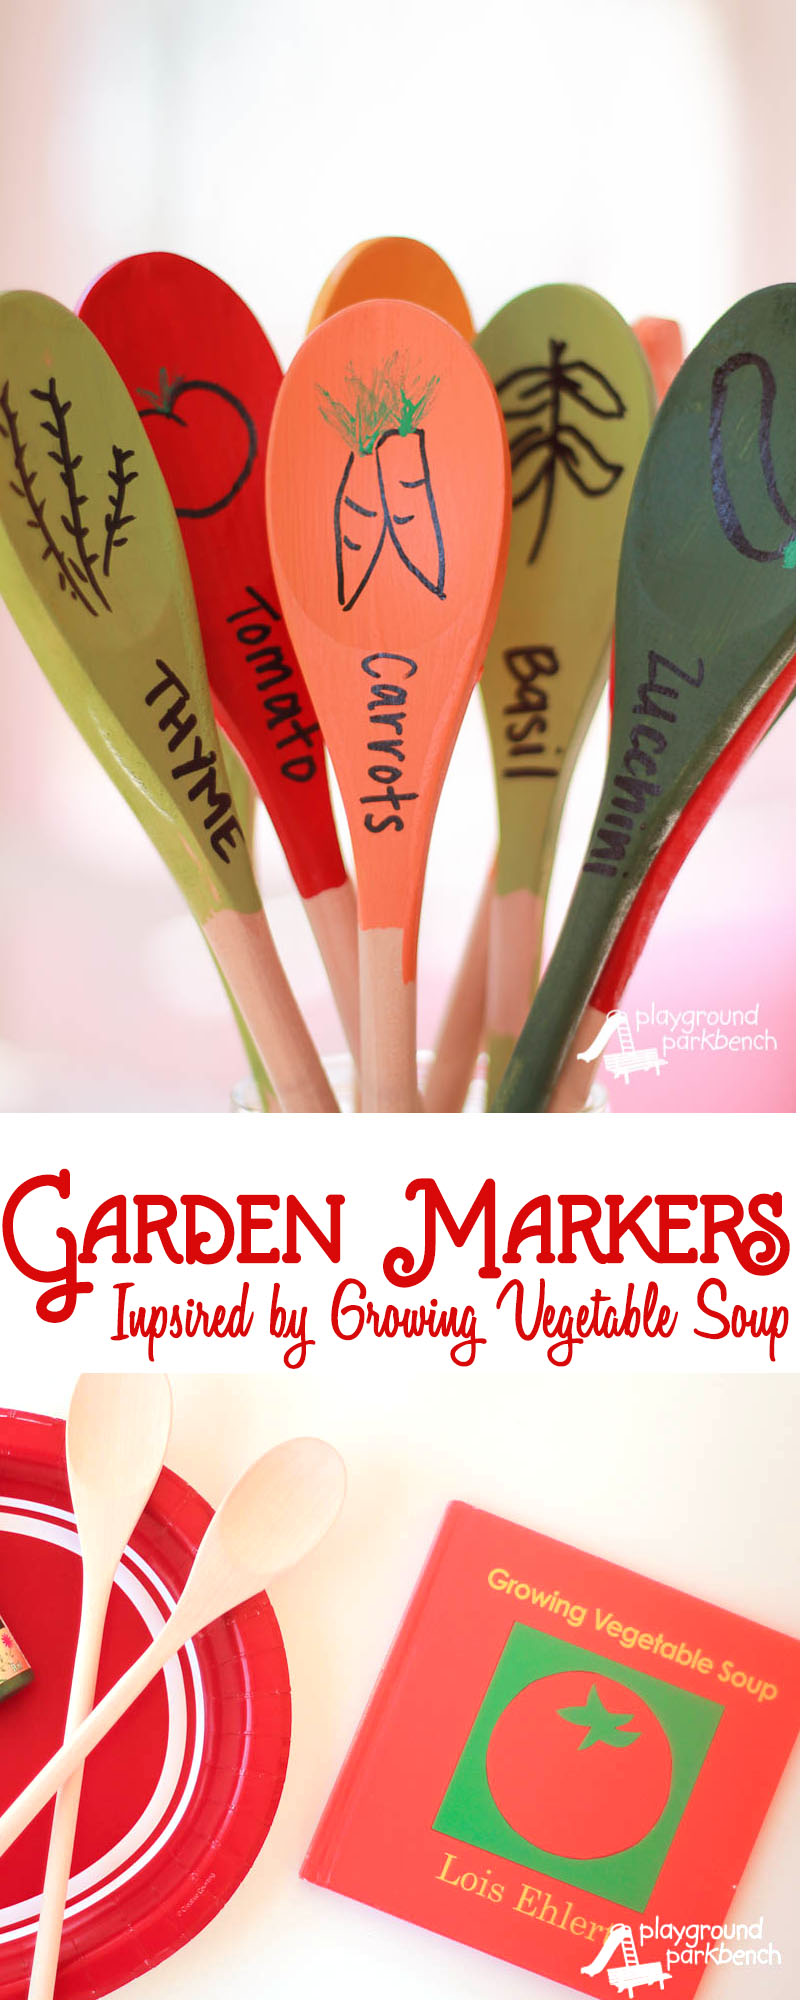 DIY Garden Markers Inspired by Lois Ehlert's Growing Vegetable Soup - Get ready to start your seeds with your kids this Spring by reading Lois Ehlert's Growing Garden boxed set and create your own DIY, permanent Garden Markers | Gardening | DIY | Crafts for Kids | Kids Activities | Children's Books | Spring | Gardening with Kids |